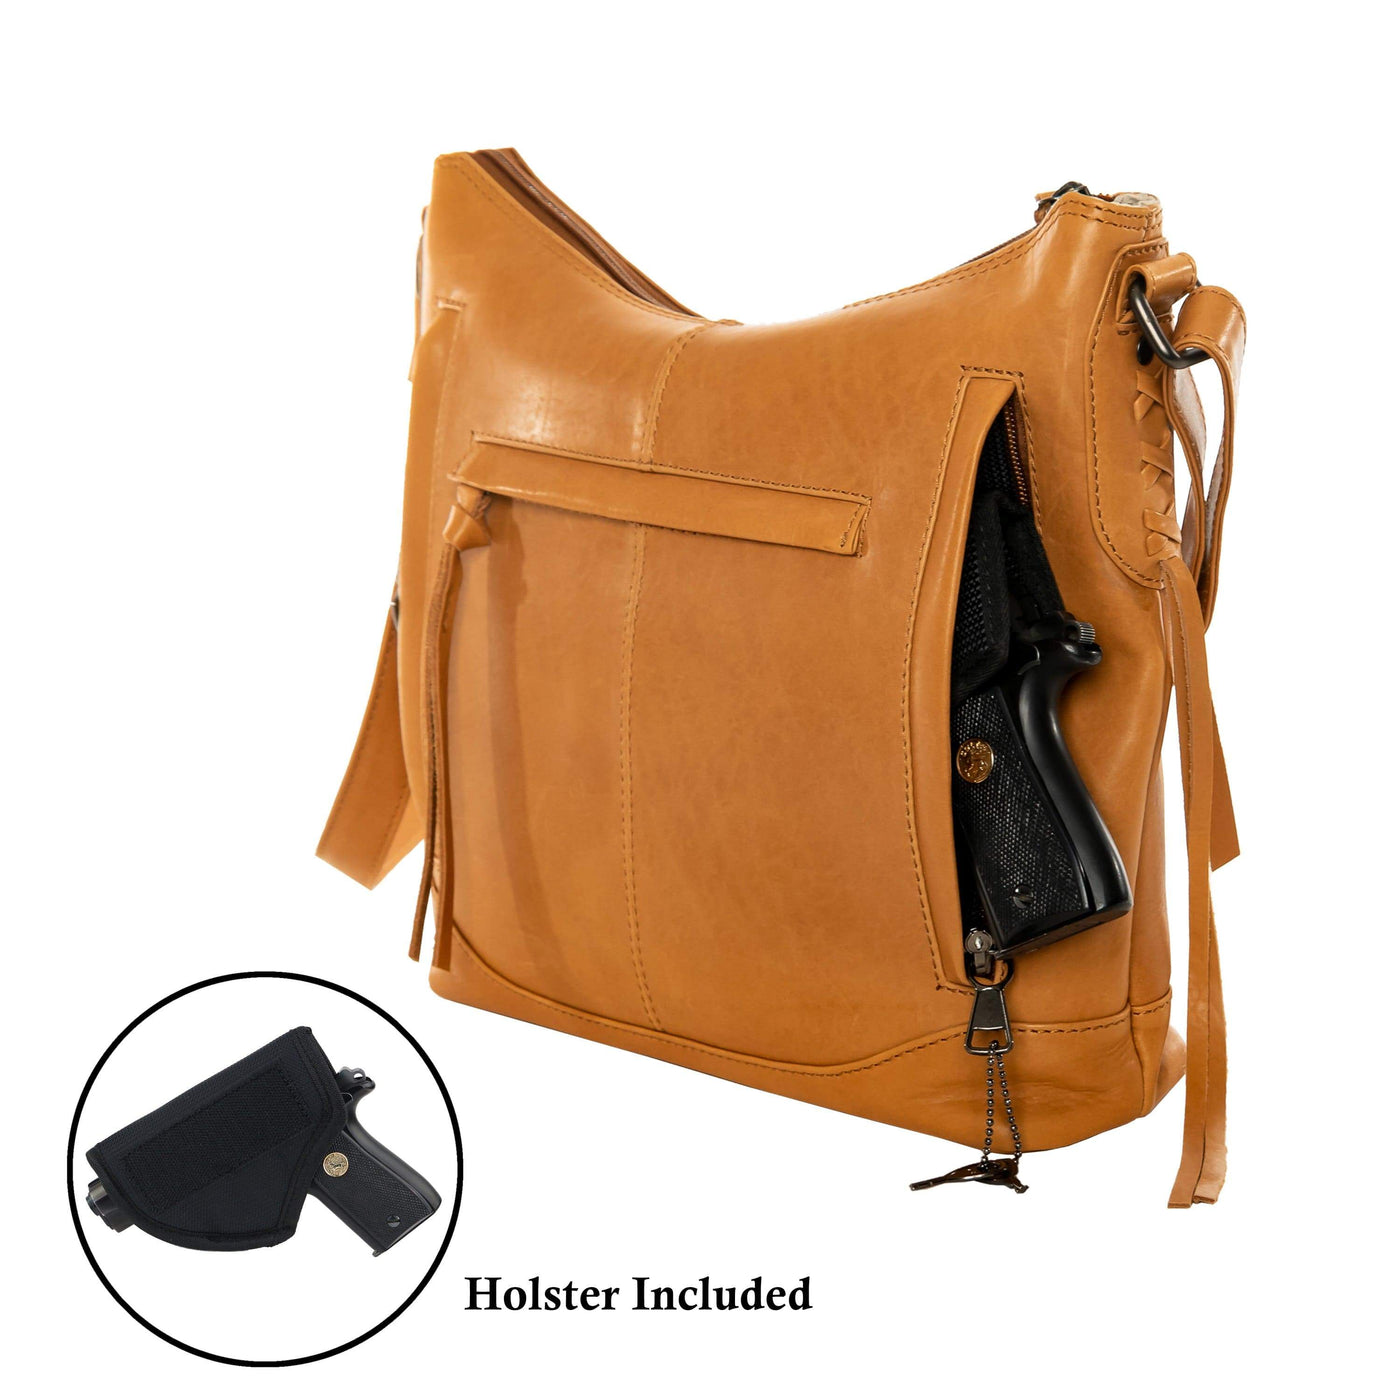 Lady Conceal Concealed Carry Purse Dark Mahogany Concealed Carry Blake Scooped Leather Crossbody Bag by Lady Conceal